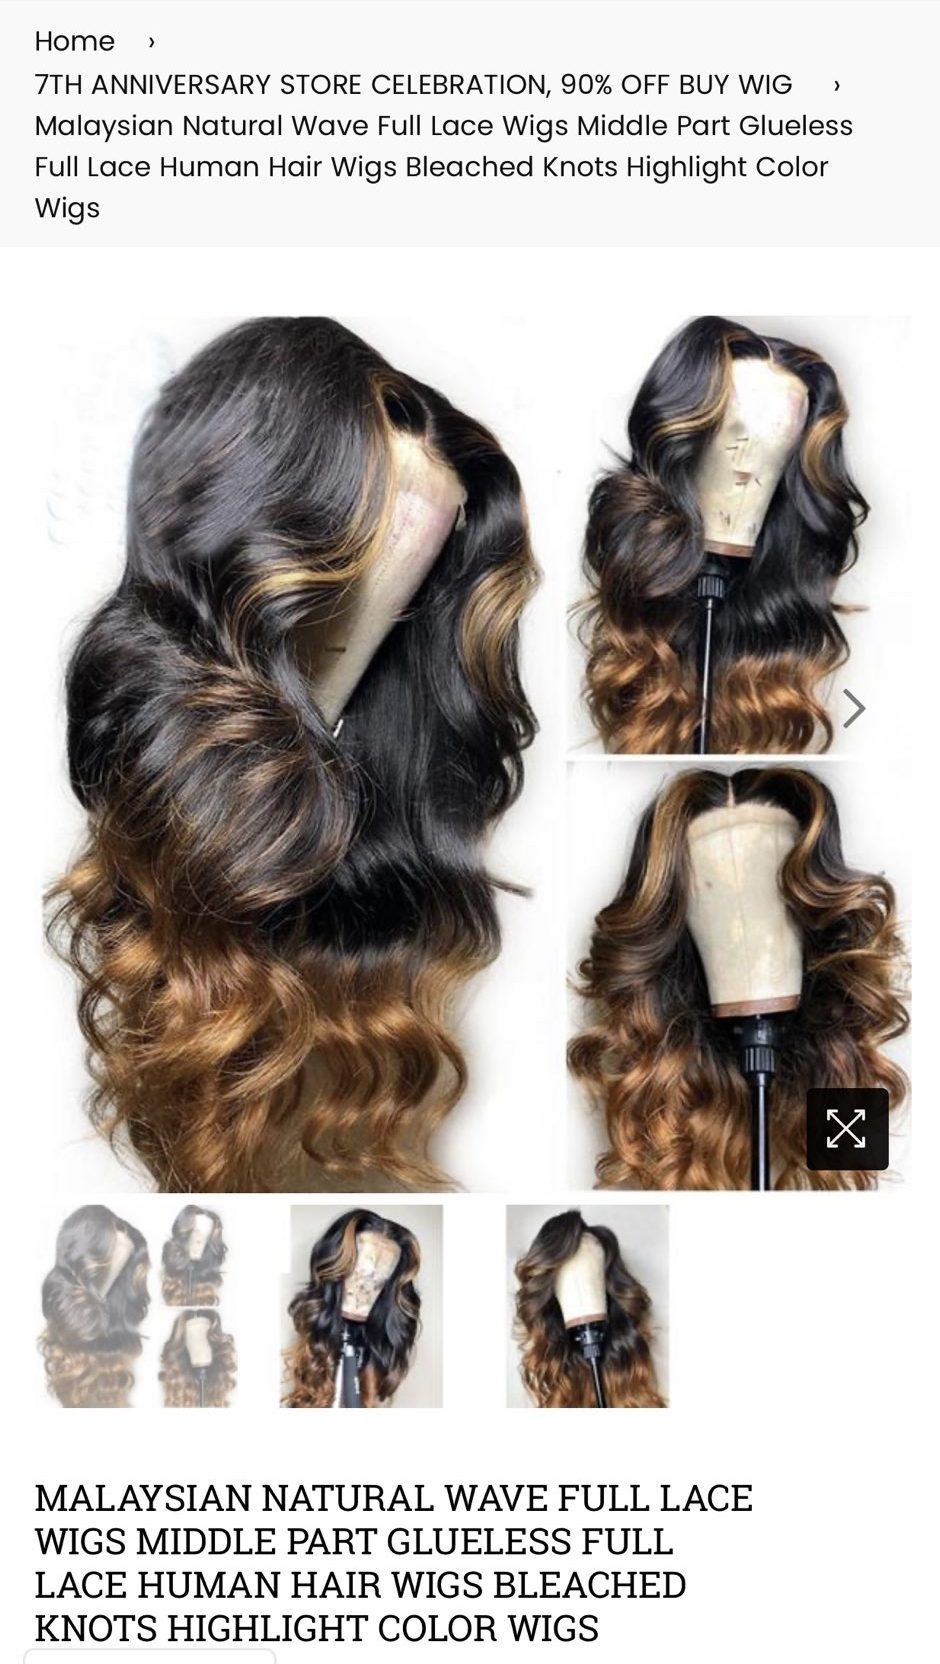 Wig that I ordered